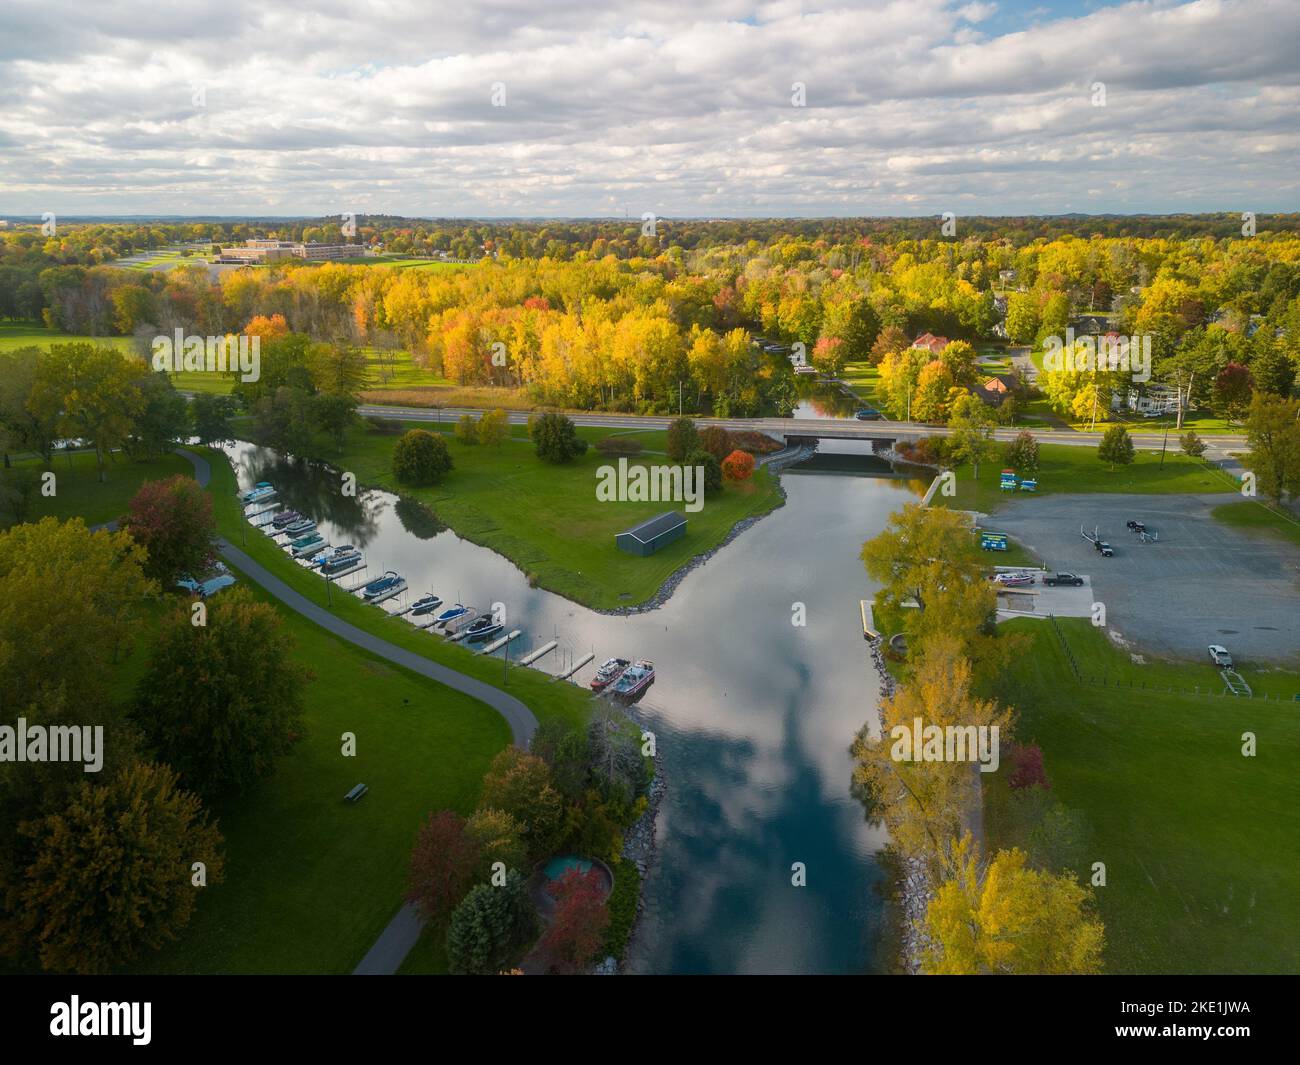 An aerial shot of the scenic Emerson Park in Auburn New York with flowing water and green vegetation Stock Photo